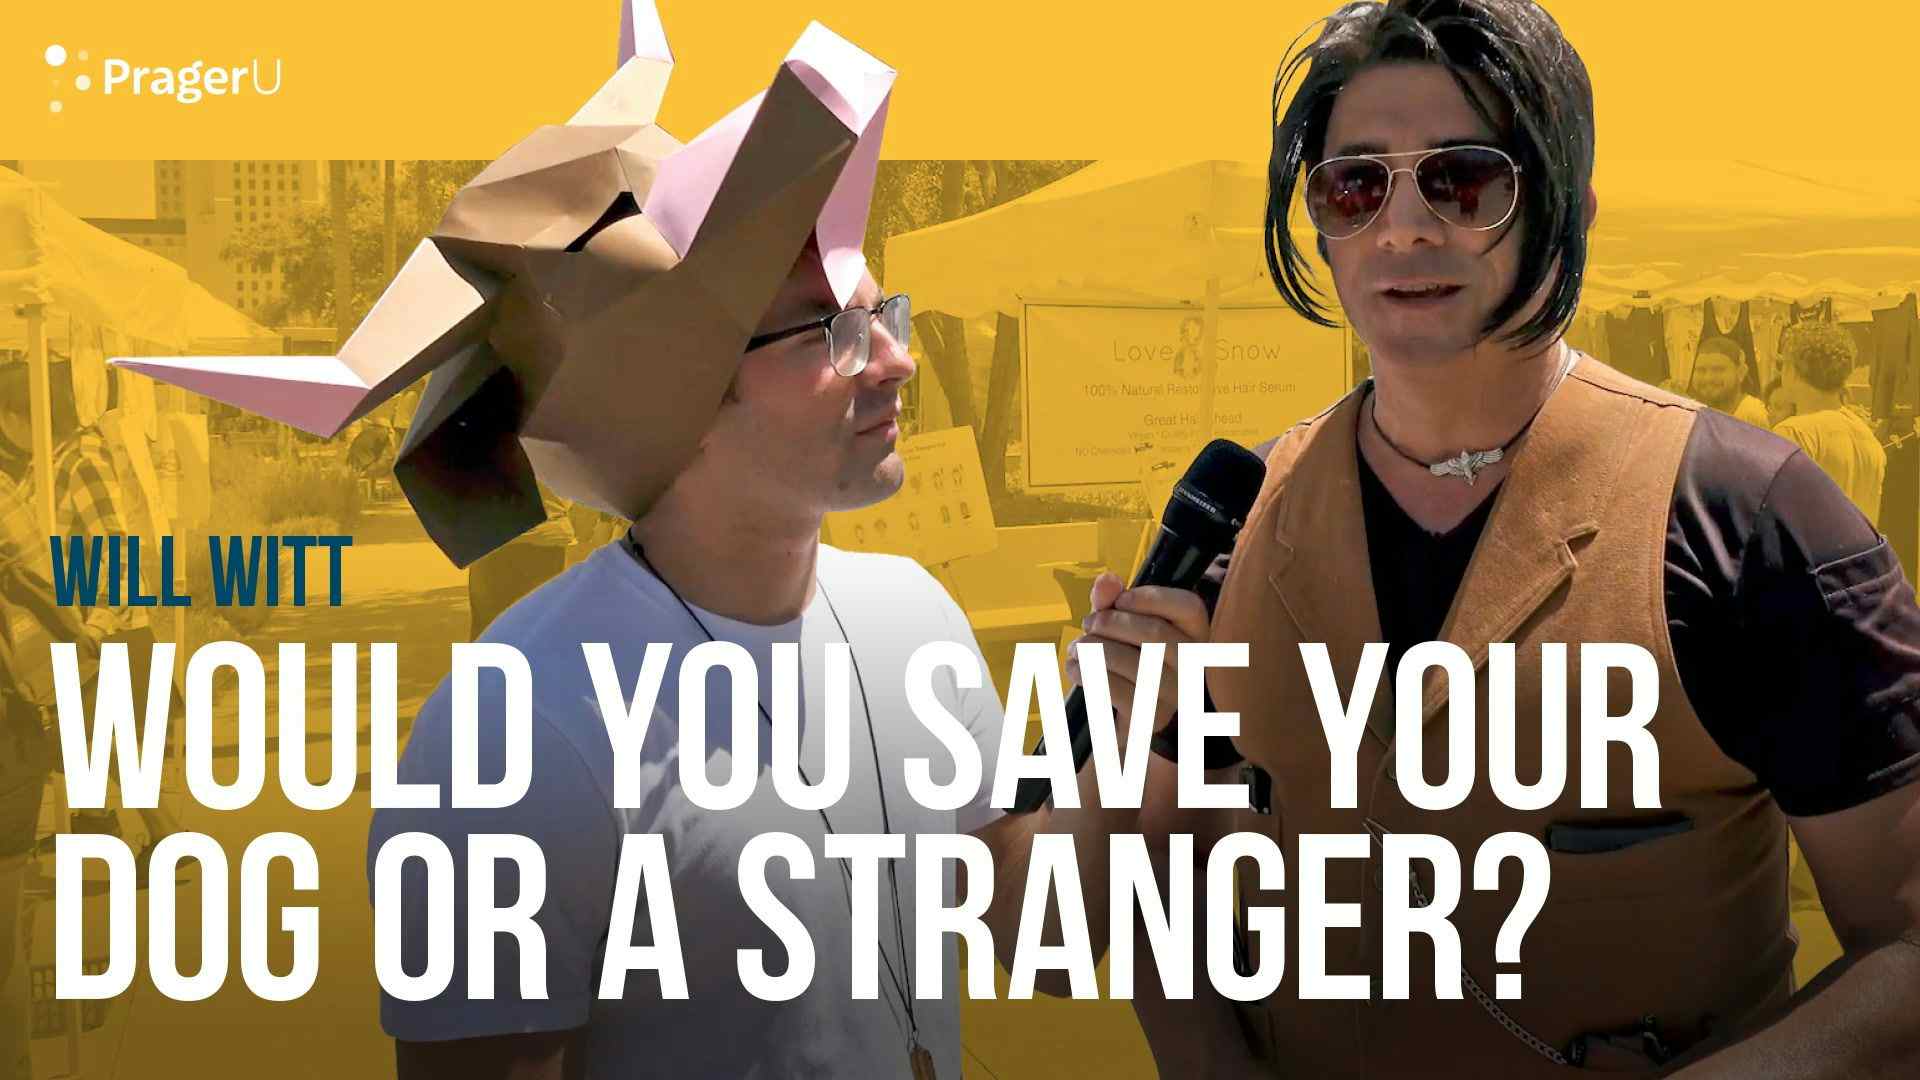 Would You Save Your Dog or a Stranger?